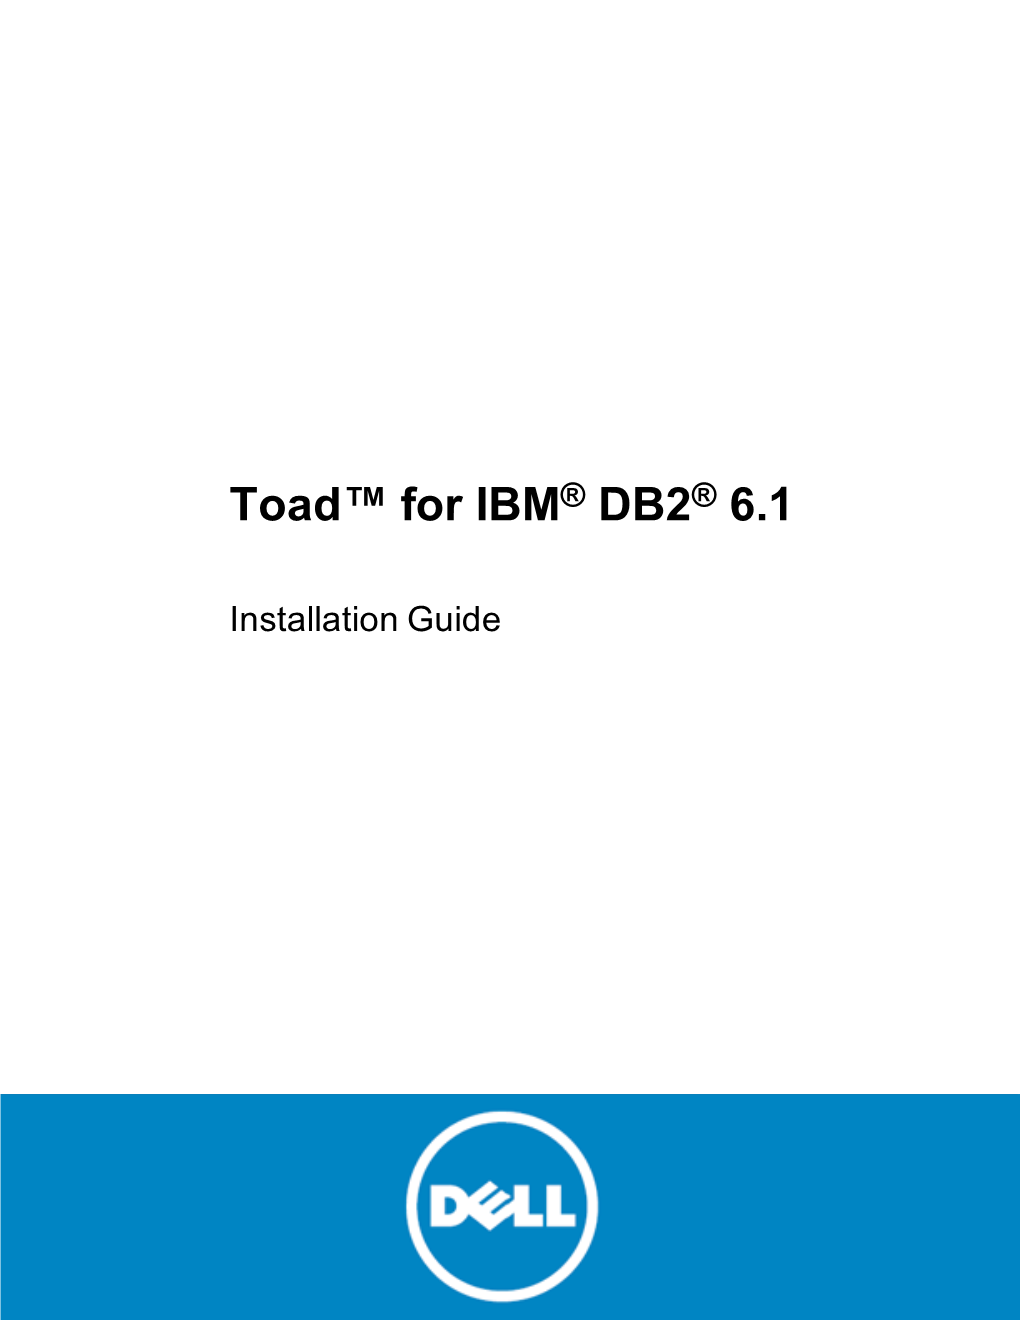 Toad for DB2 Installation Guide